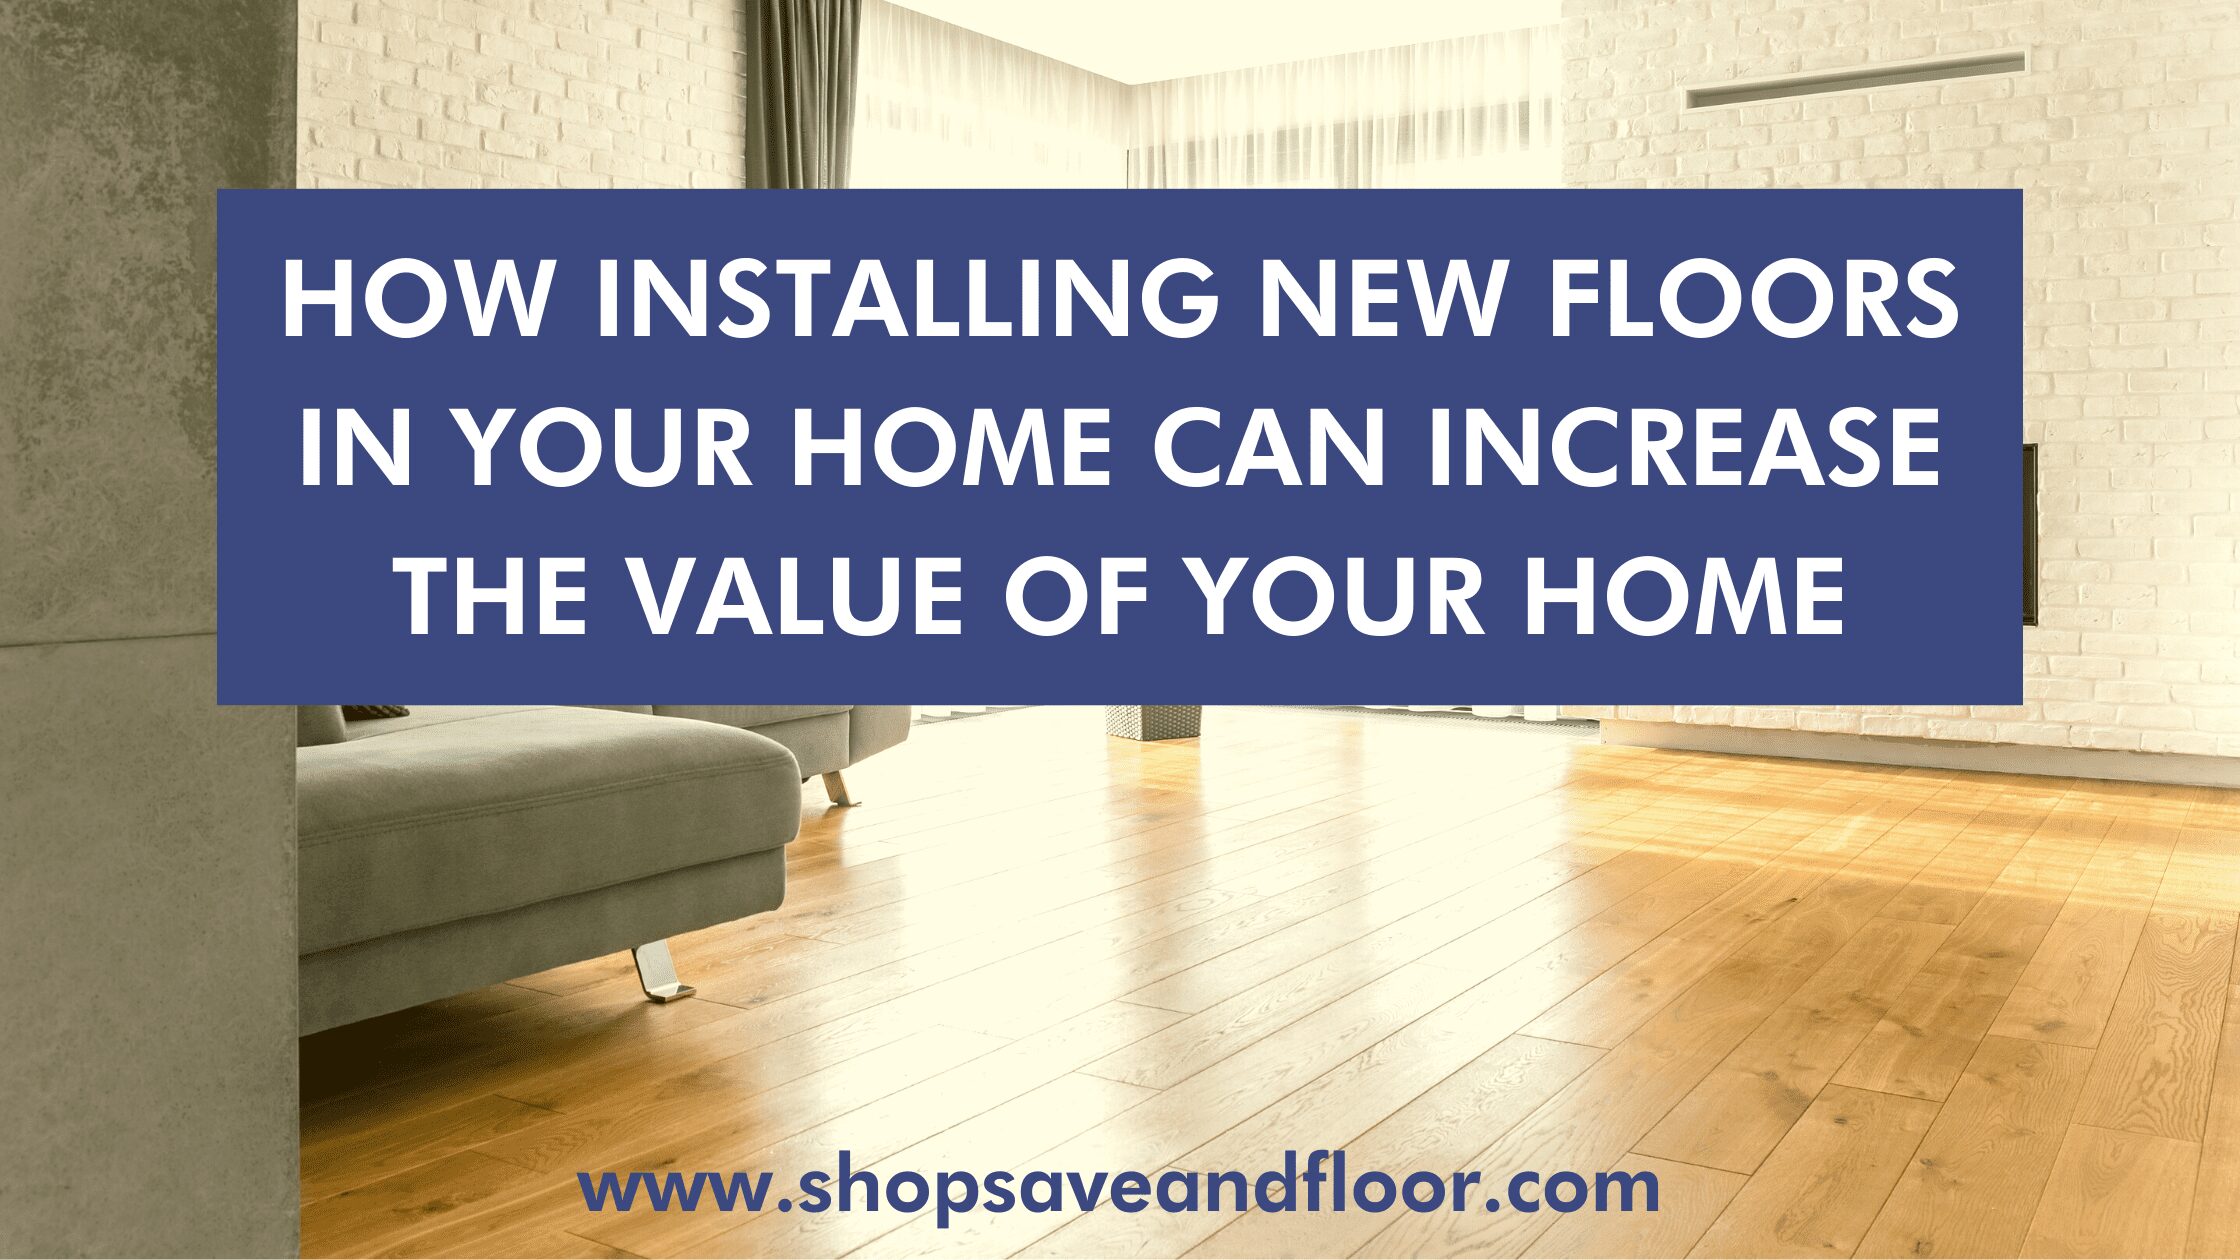 How Installing New Floors in Your Home Can Increase the Value of Your Home